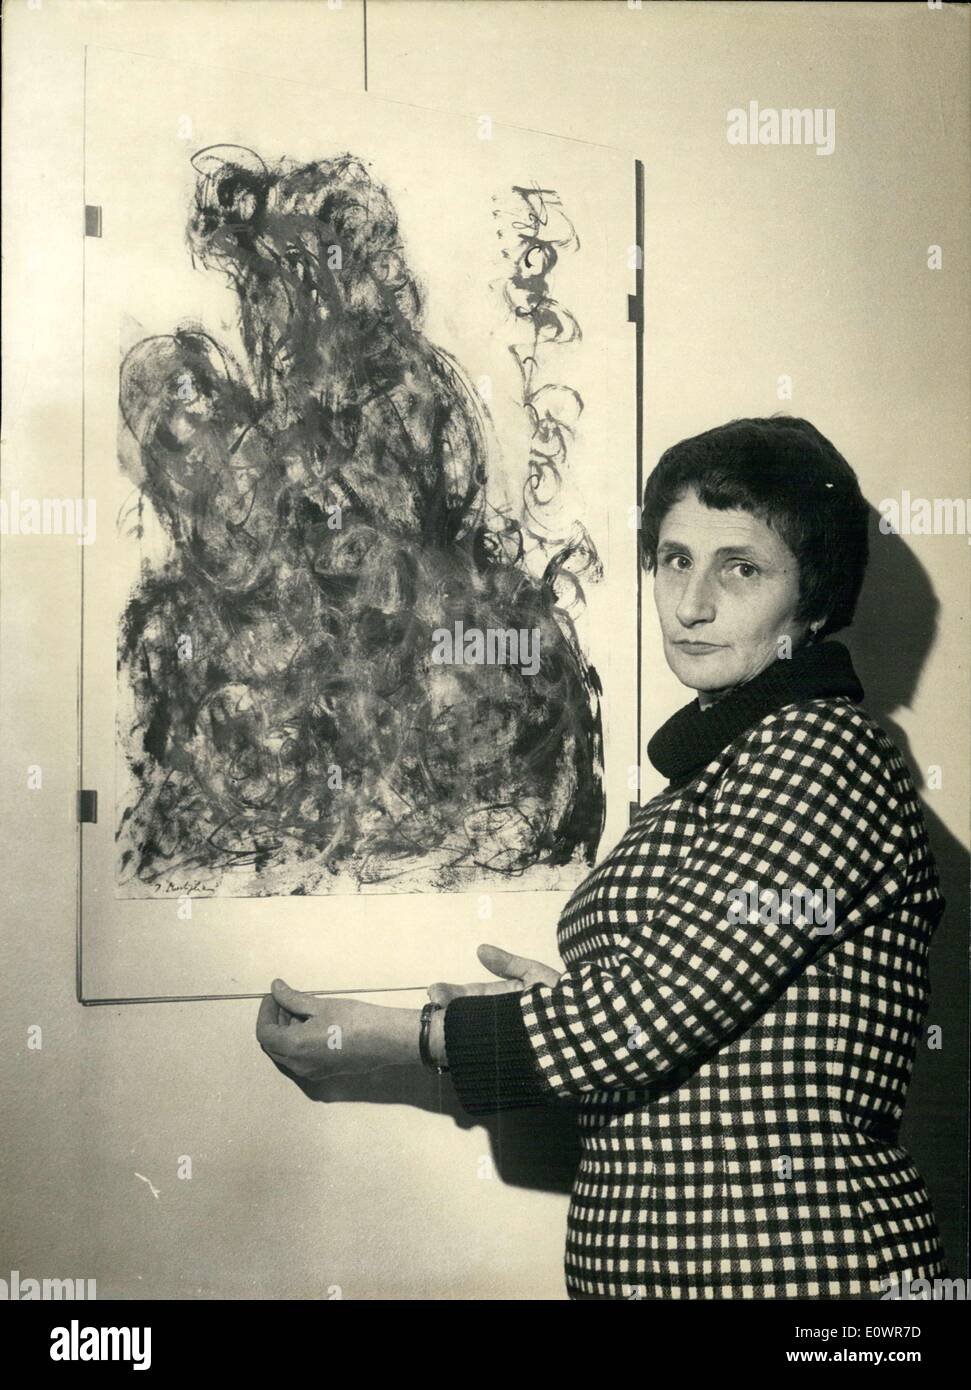 Nov. 16, 1963 - Jeanne Modigliani and abstract art on exhibit Stock Photo